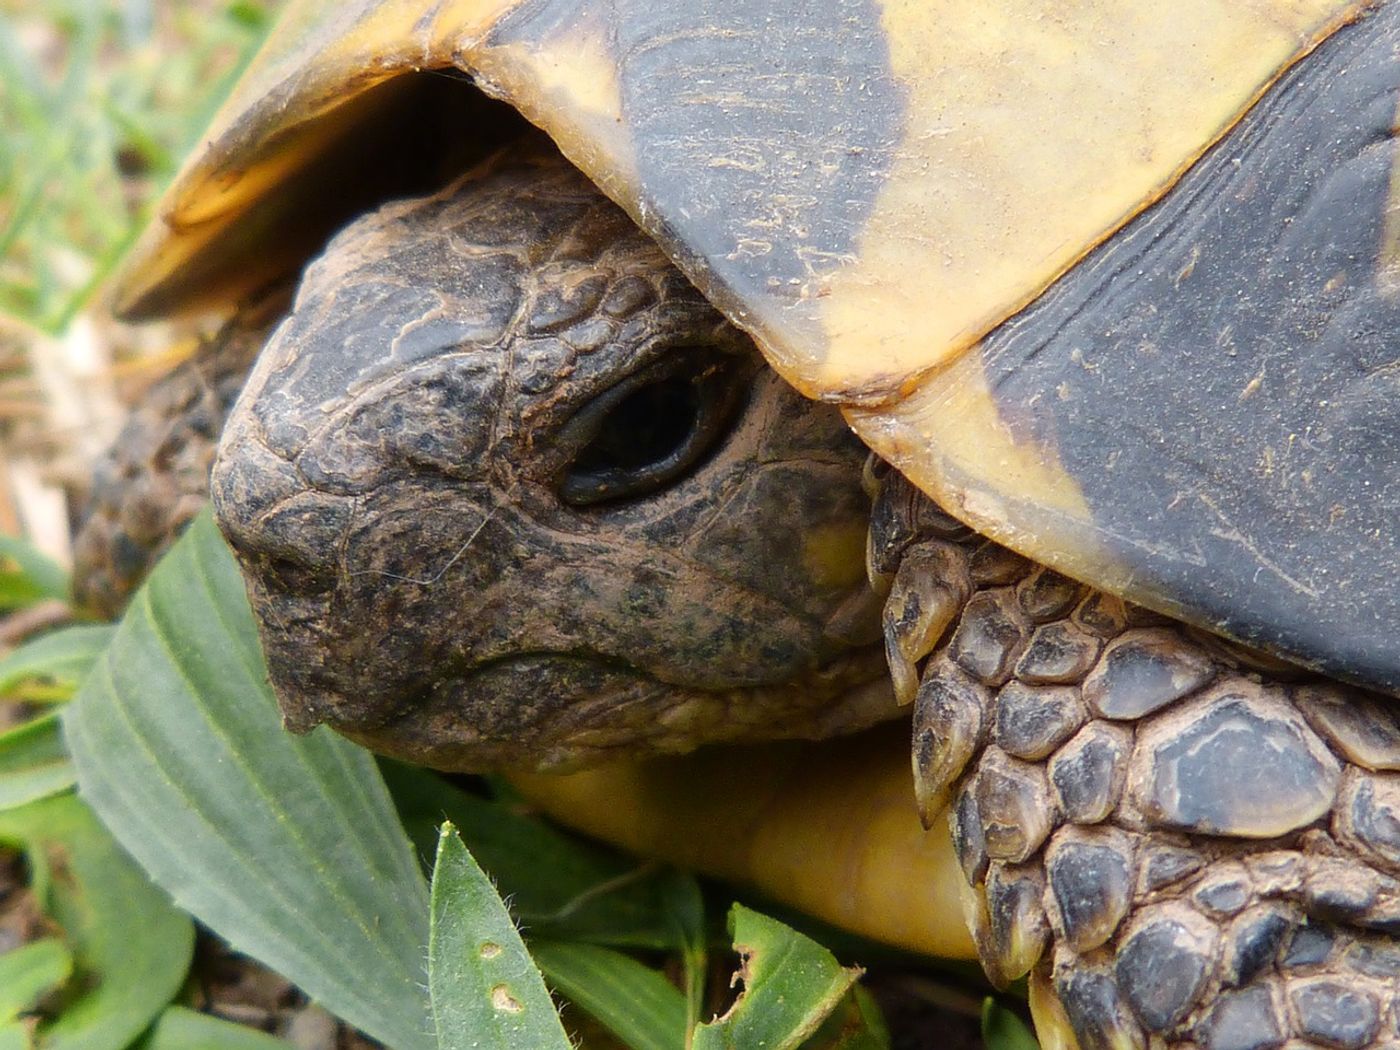 Turtles today hide their heads in their shells for protection, but in ancient times, they might have used this feature as a lunging tactic to nab their prey.